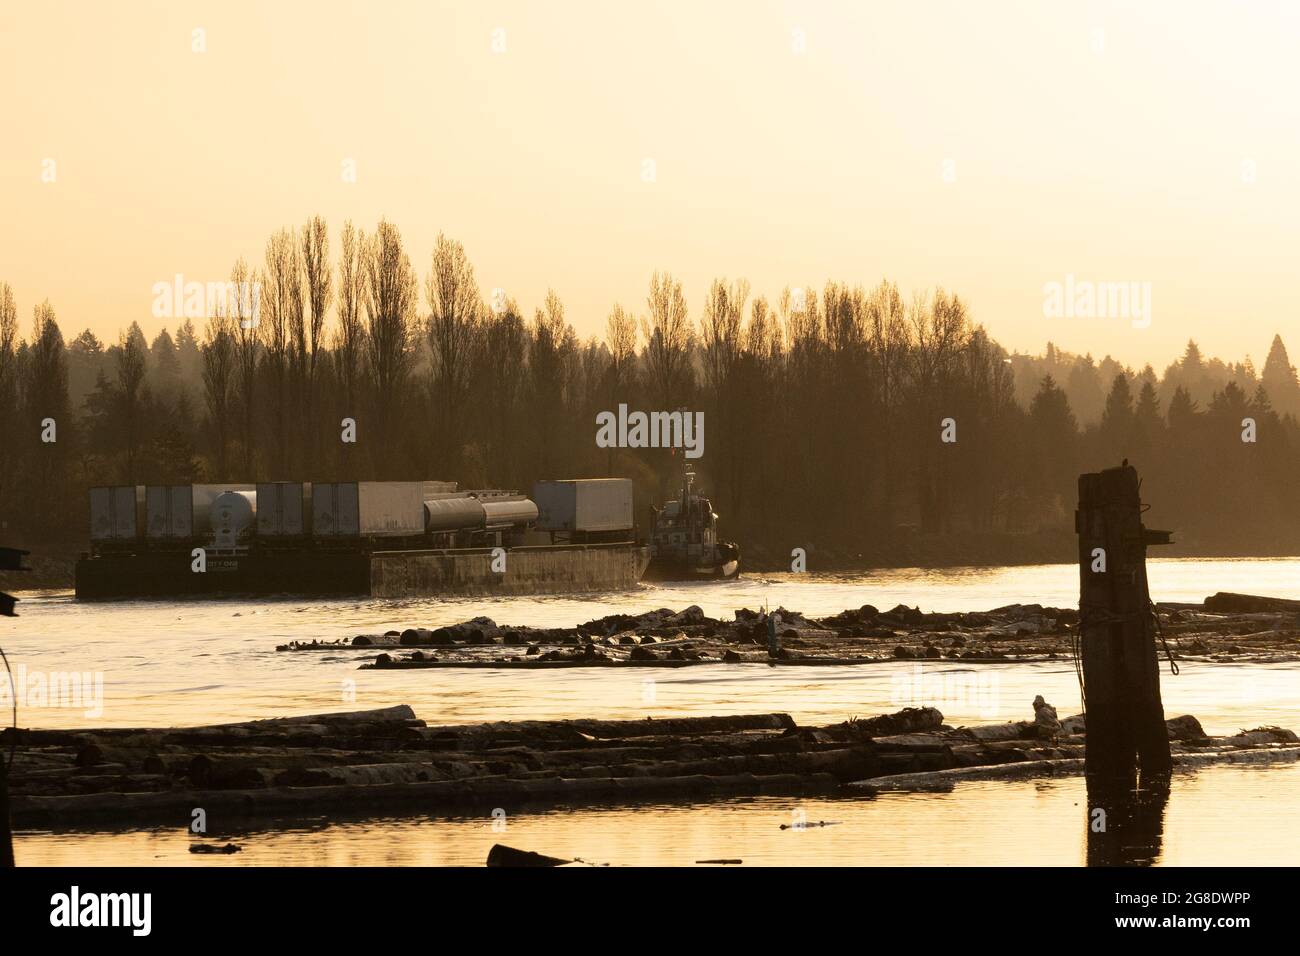 Commercial barge in the lower Fraser River. Stock Photo